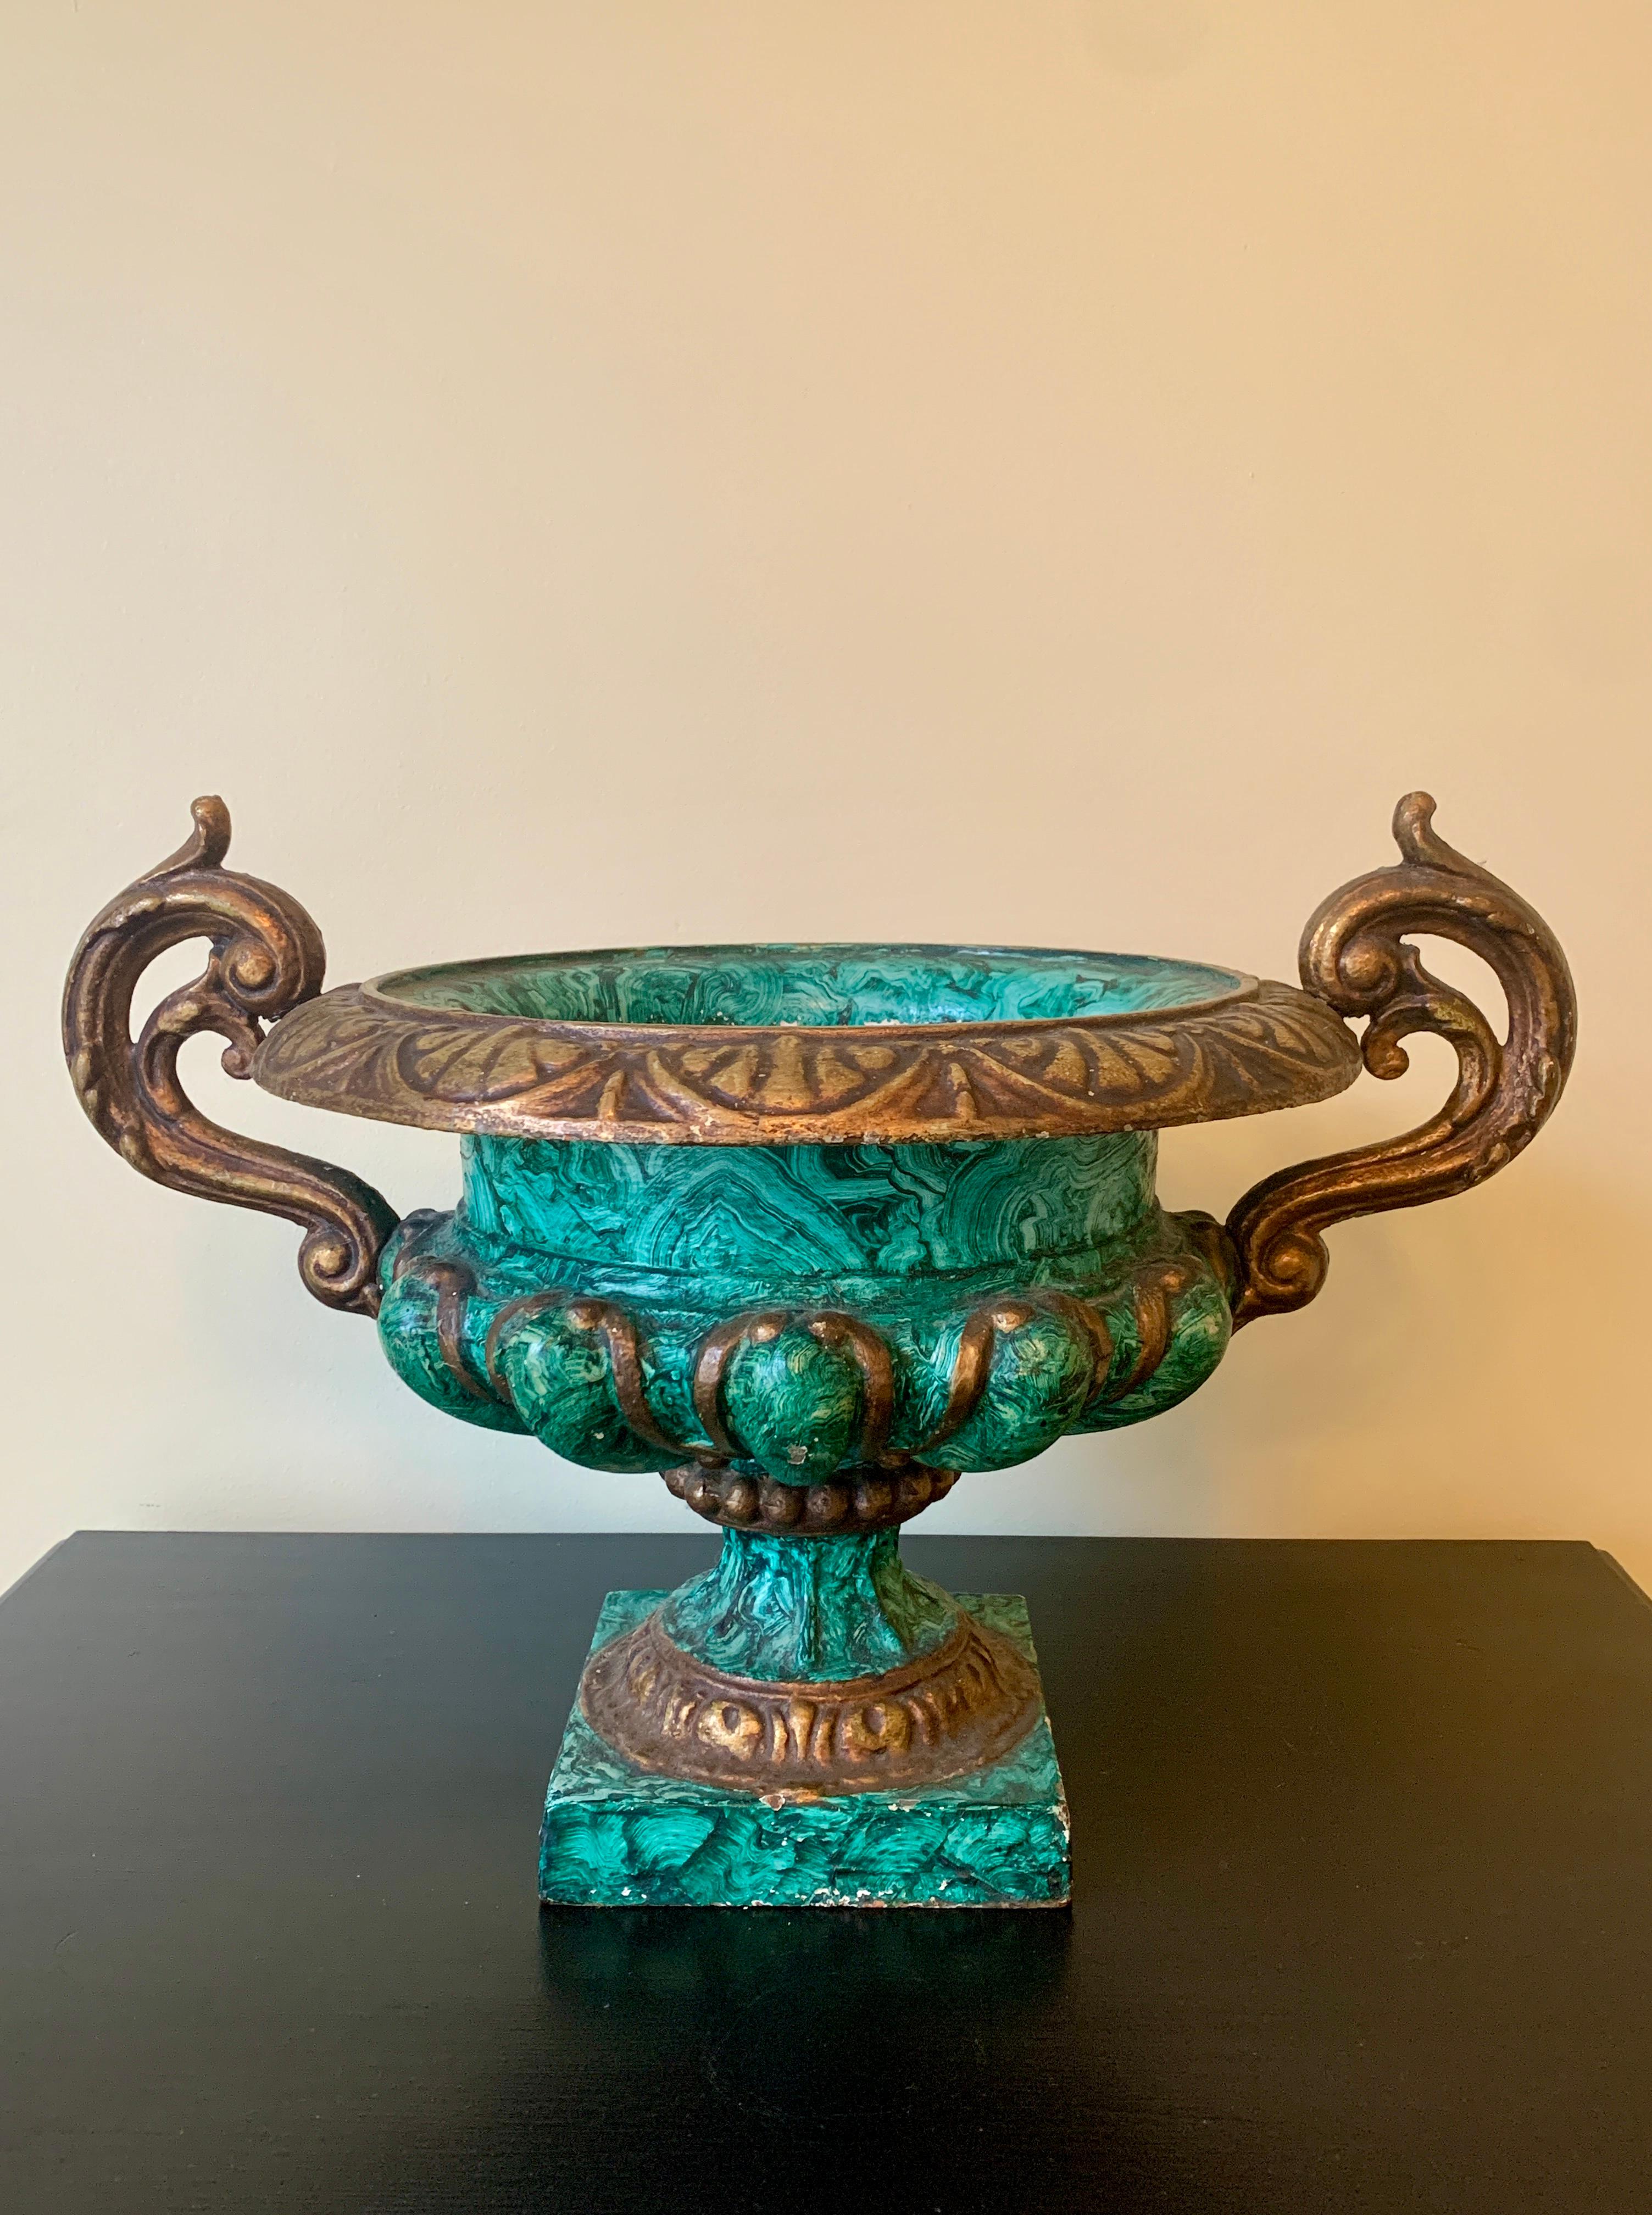 A stunning Grand Tour Neoclassical vase, urn, or planter. 

Italy, Circa Early-20th Century

Cast iron, with a hand-painted faux malachite pattern, and gold handles & rims

Measures: 18.25